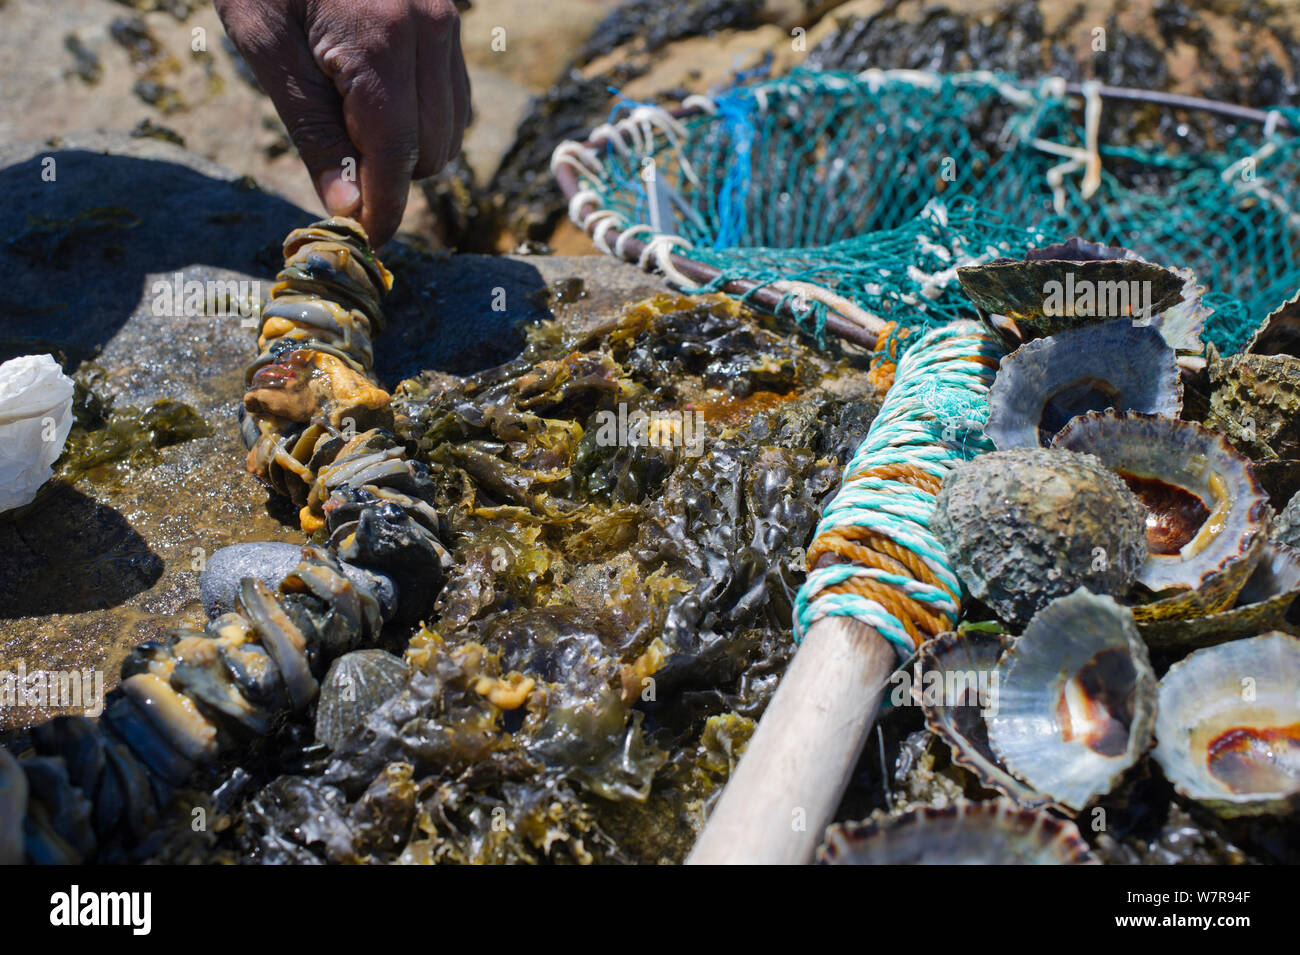 West coast rock lobster (Jasus lalandii) fishing equipment. Limpets as bait and a hoop net used by recreational fisherman. Kommetjie, South Africa. Stock Photo